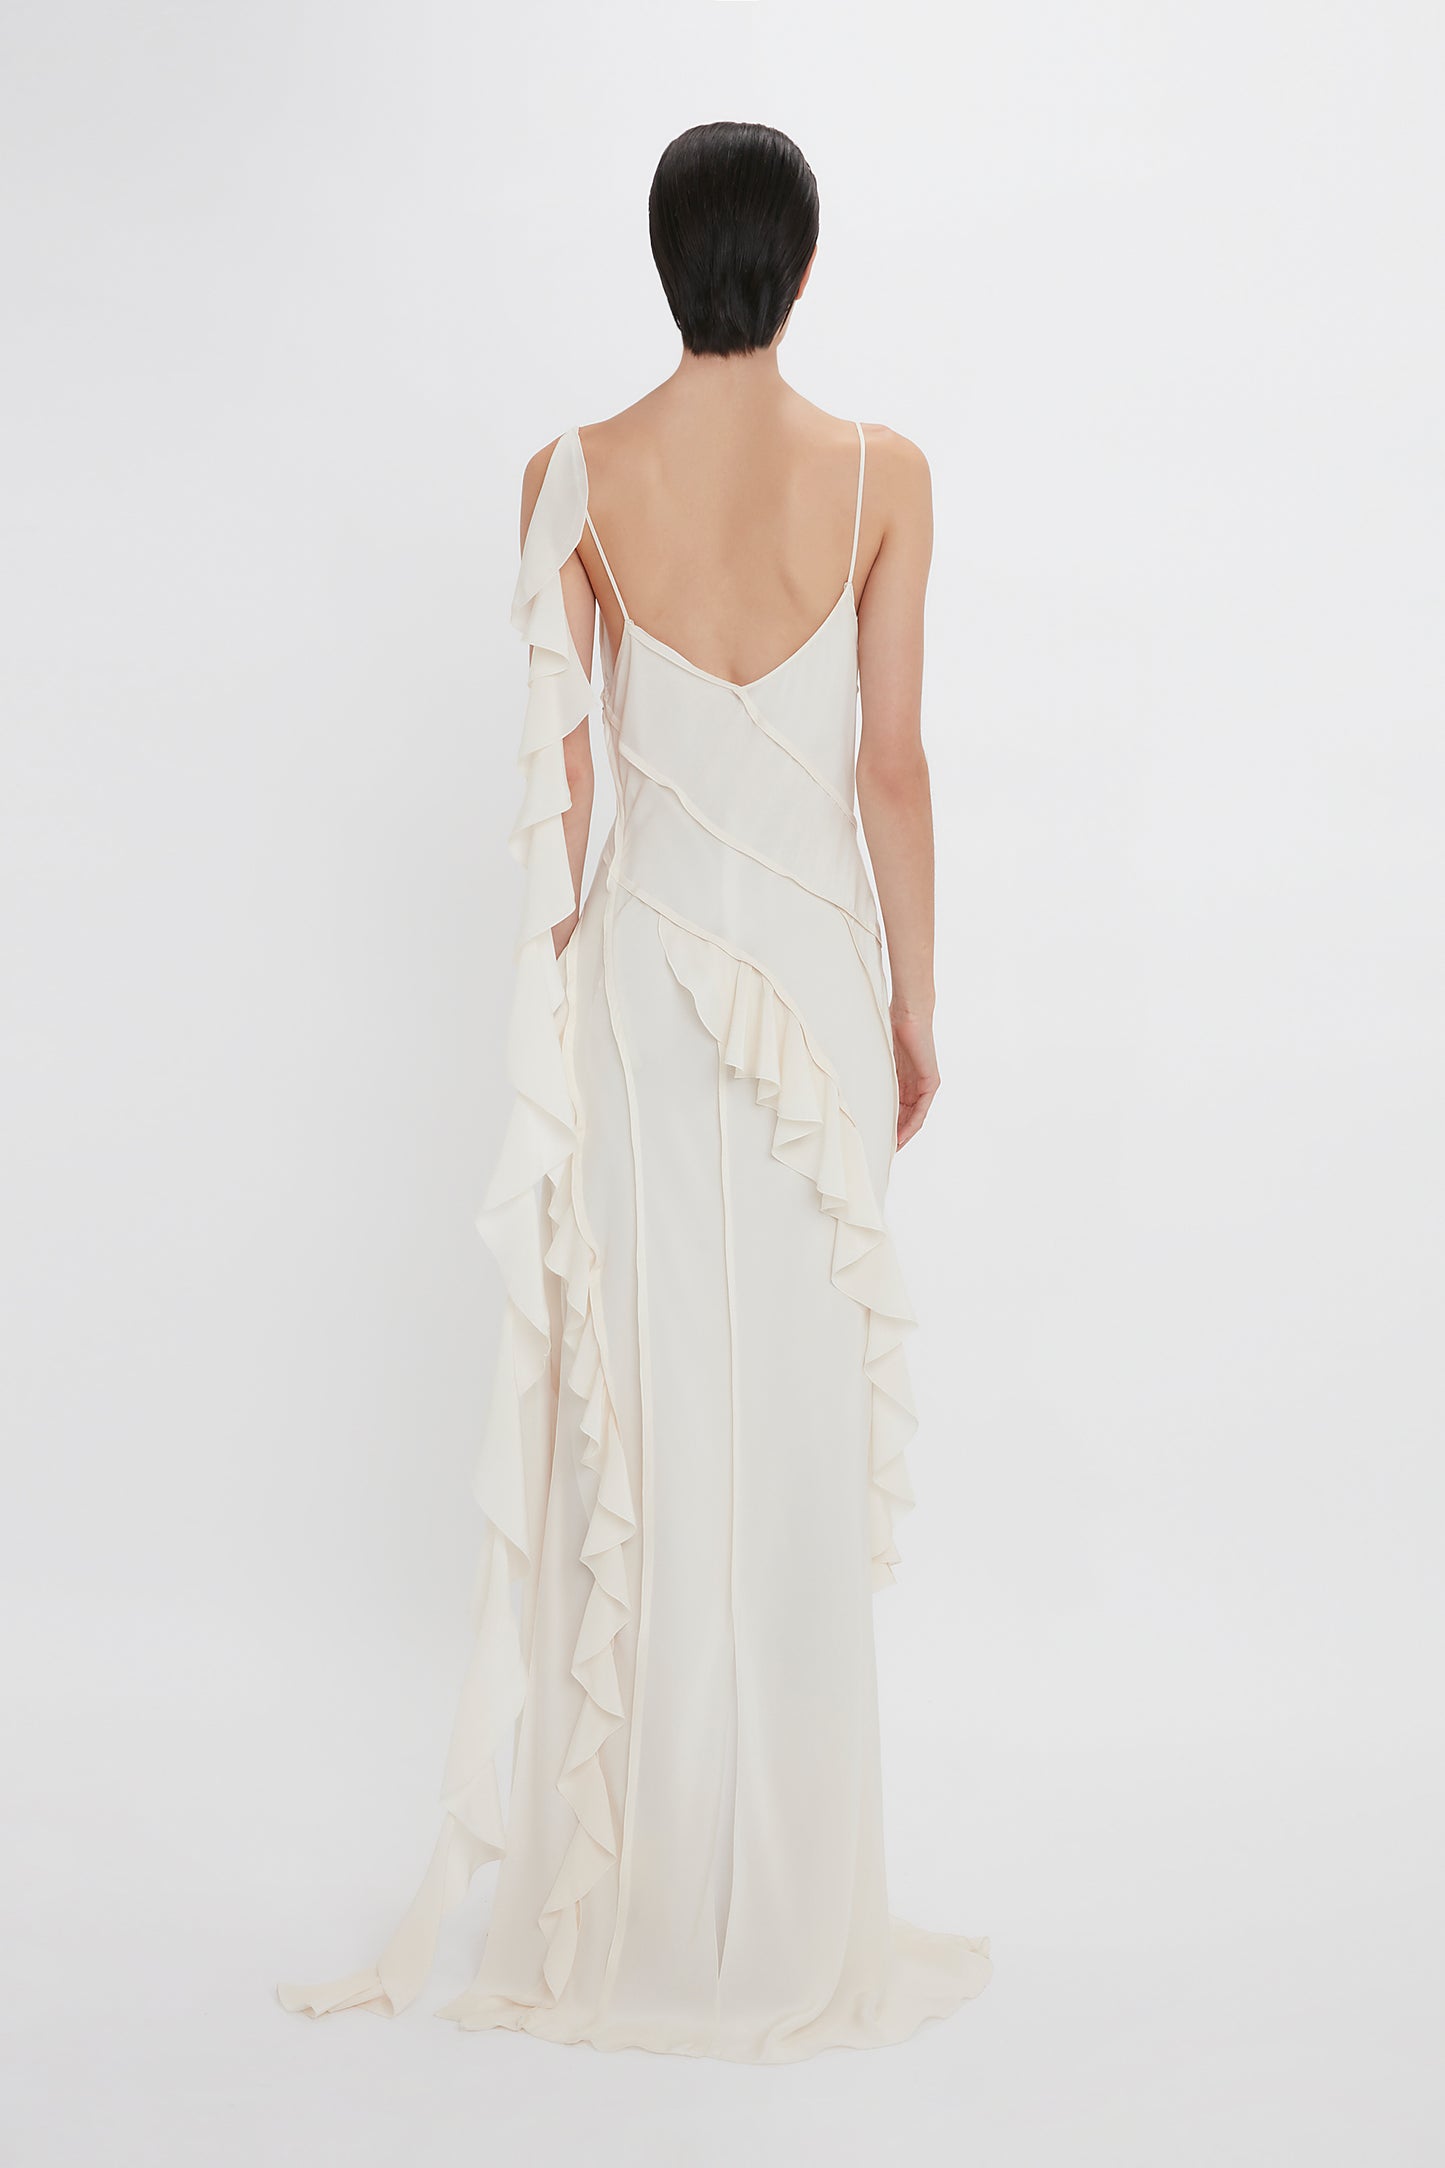 A woman viewed from behind wearing an elegant white Victoria Beckham Exclusive Asymmetric Bias Frill Dress In Ivory with spaghetti straps, against a plain white background.